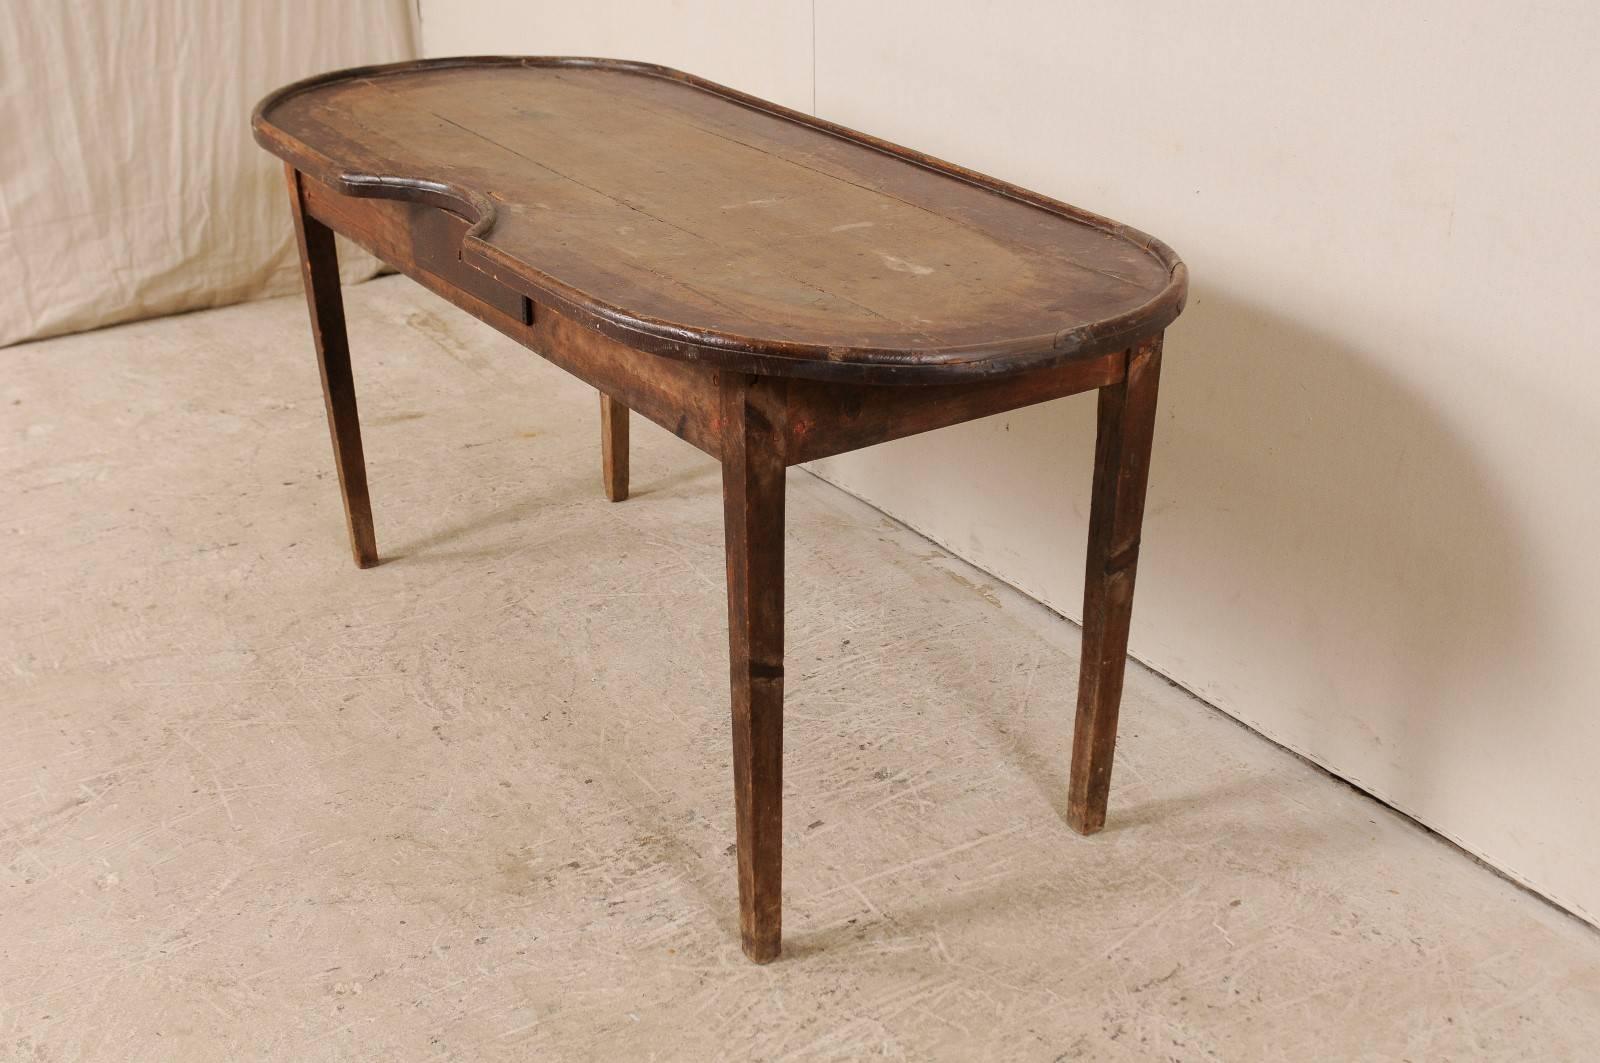 Carved Spanish 19th Century Oval Wood Gaming Table with Drawer and Nice Patina